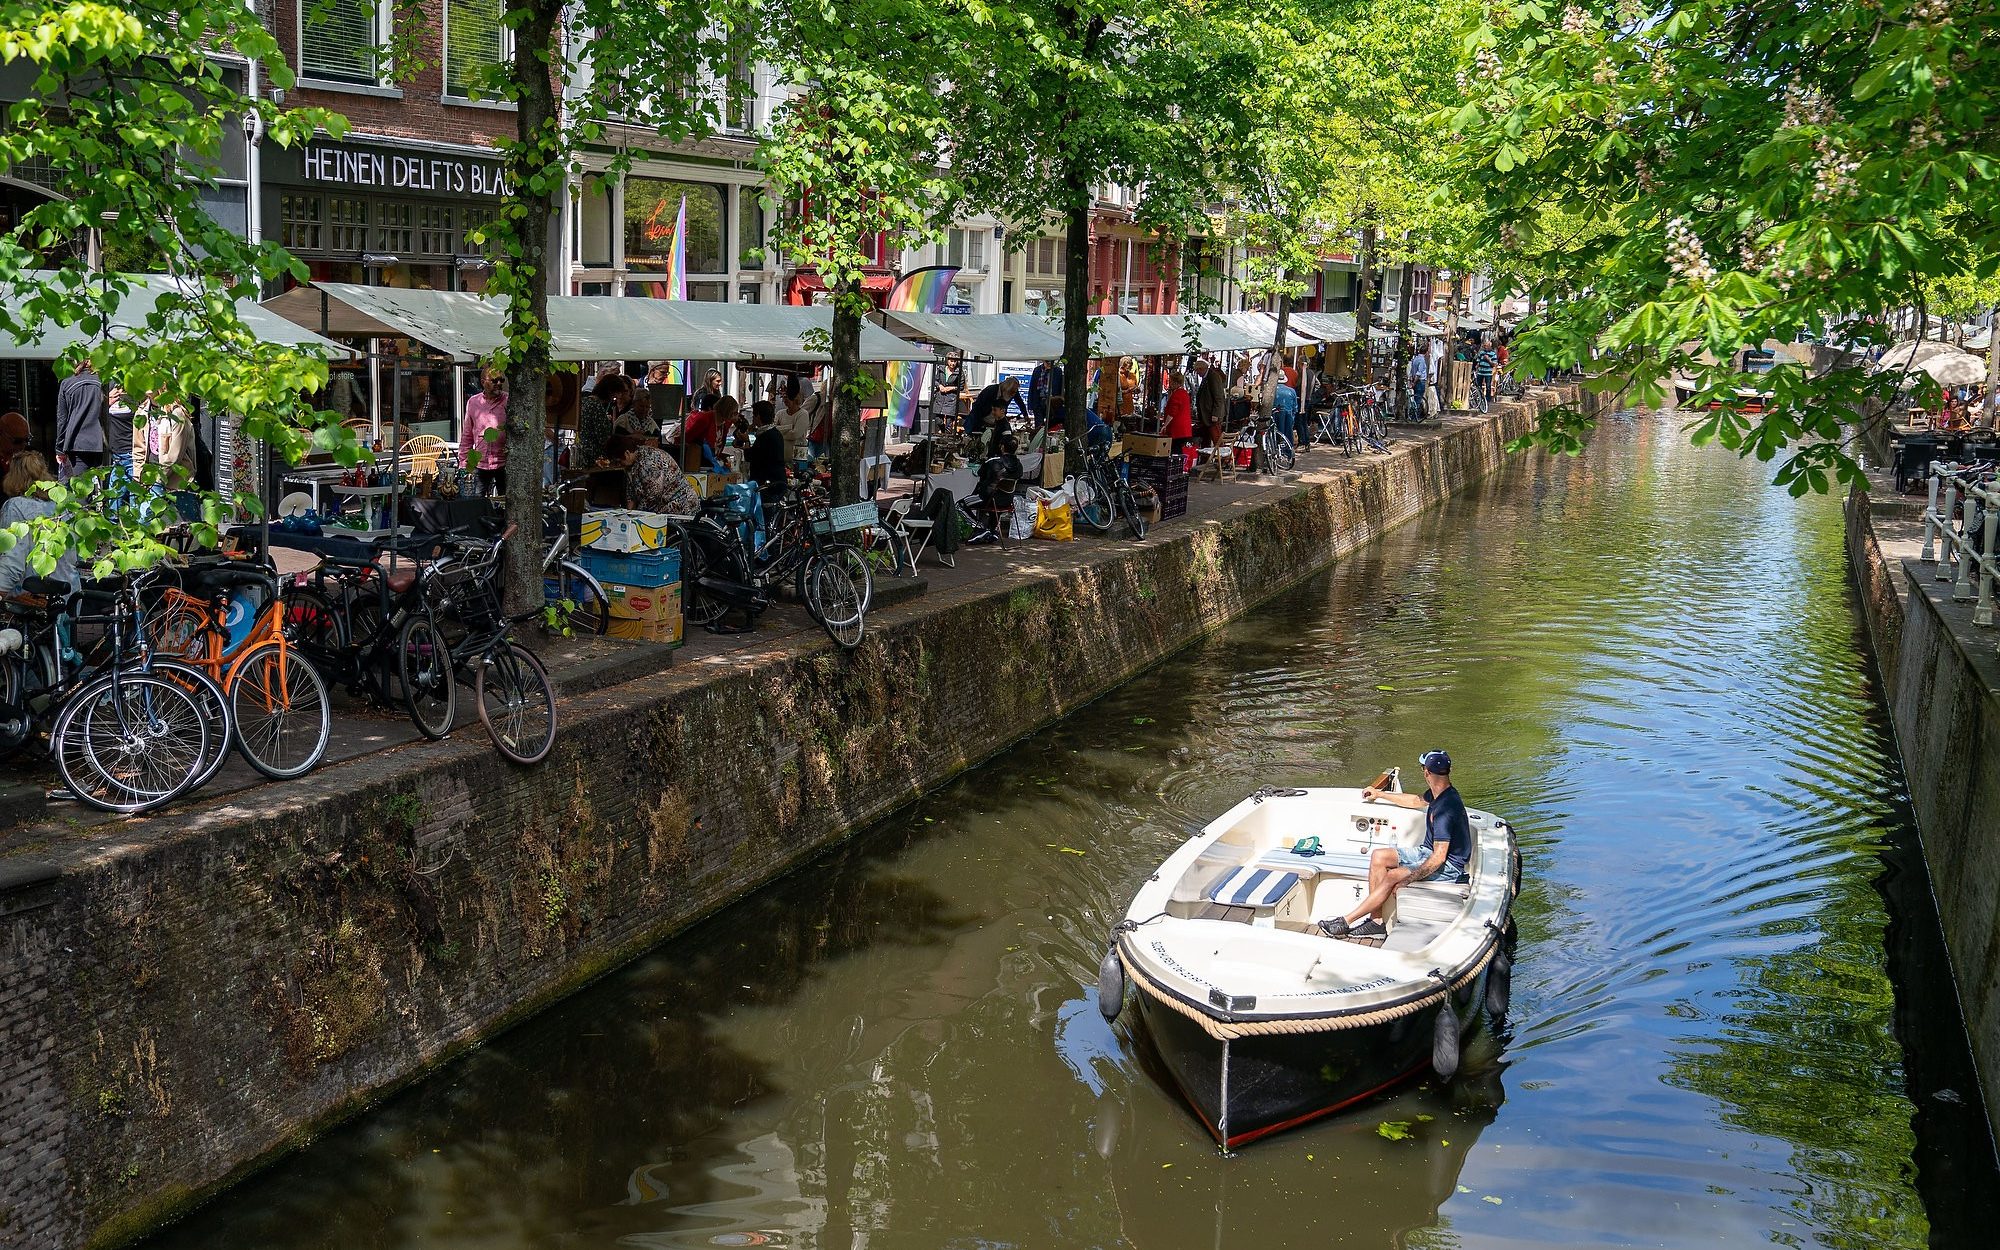 amsterdam doesn’t want any more tourists – so here are 10 alternatives